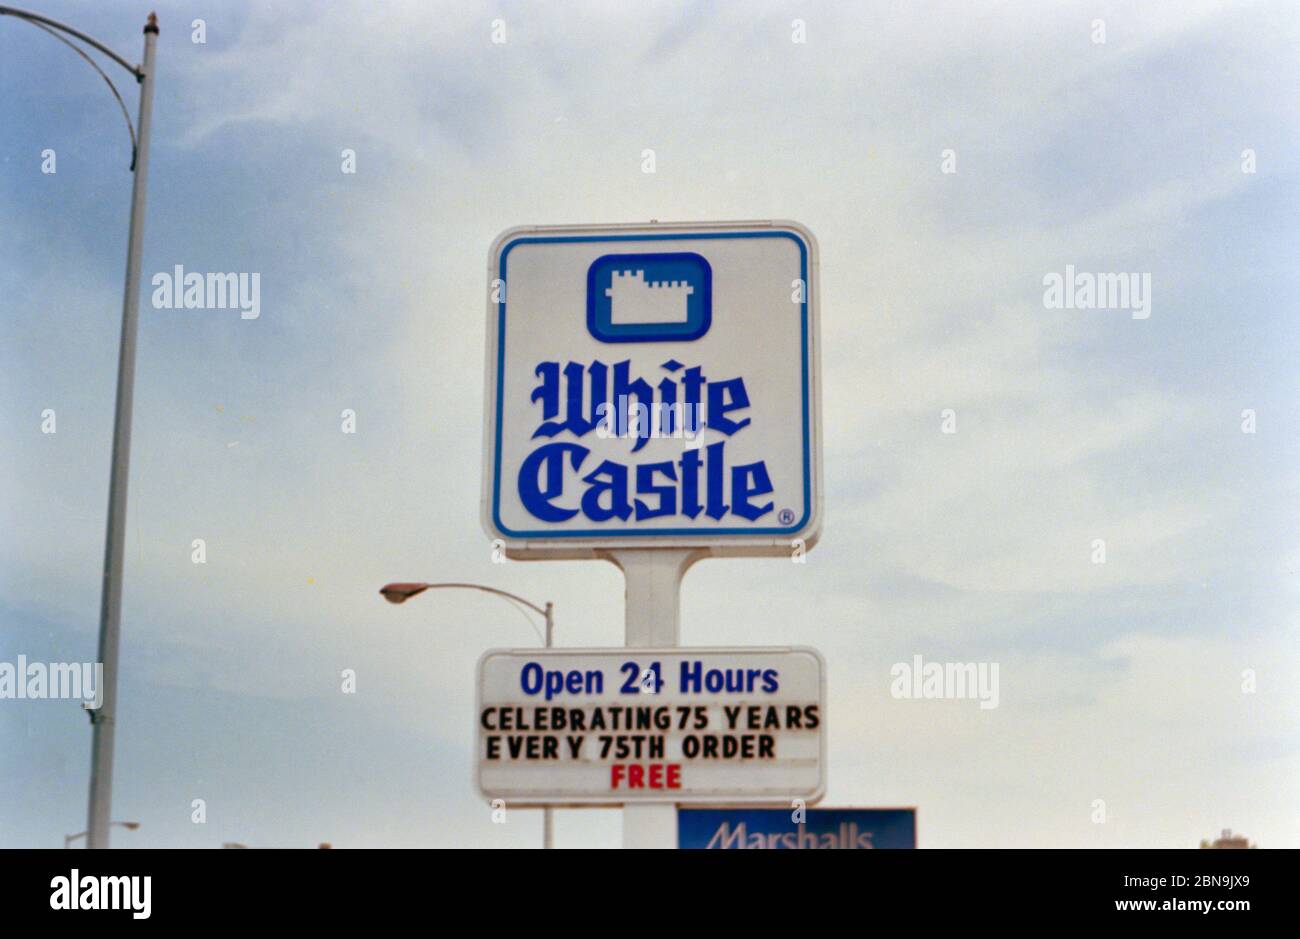 White Castle restaurant sign in Chicago south suburbs, sign celebrates their 75th anniversary ca. 1996 Stock Photo